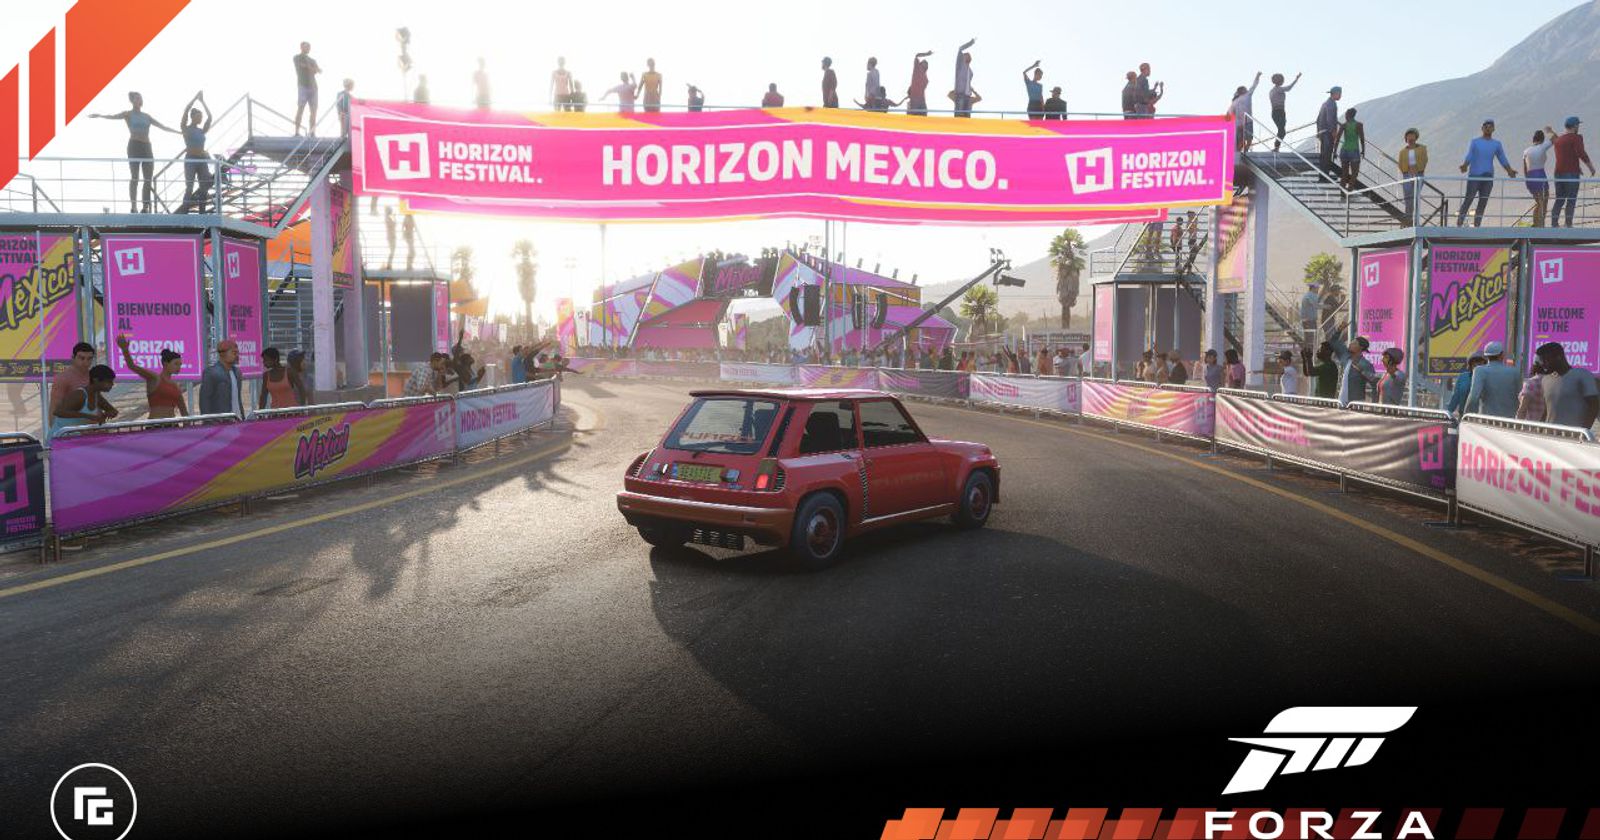 Forza Horizon 5 is IGN's GOTY 2021 (4 Awards in total) - Gaming